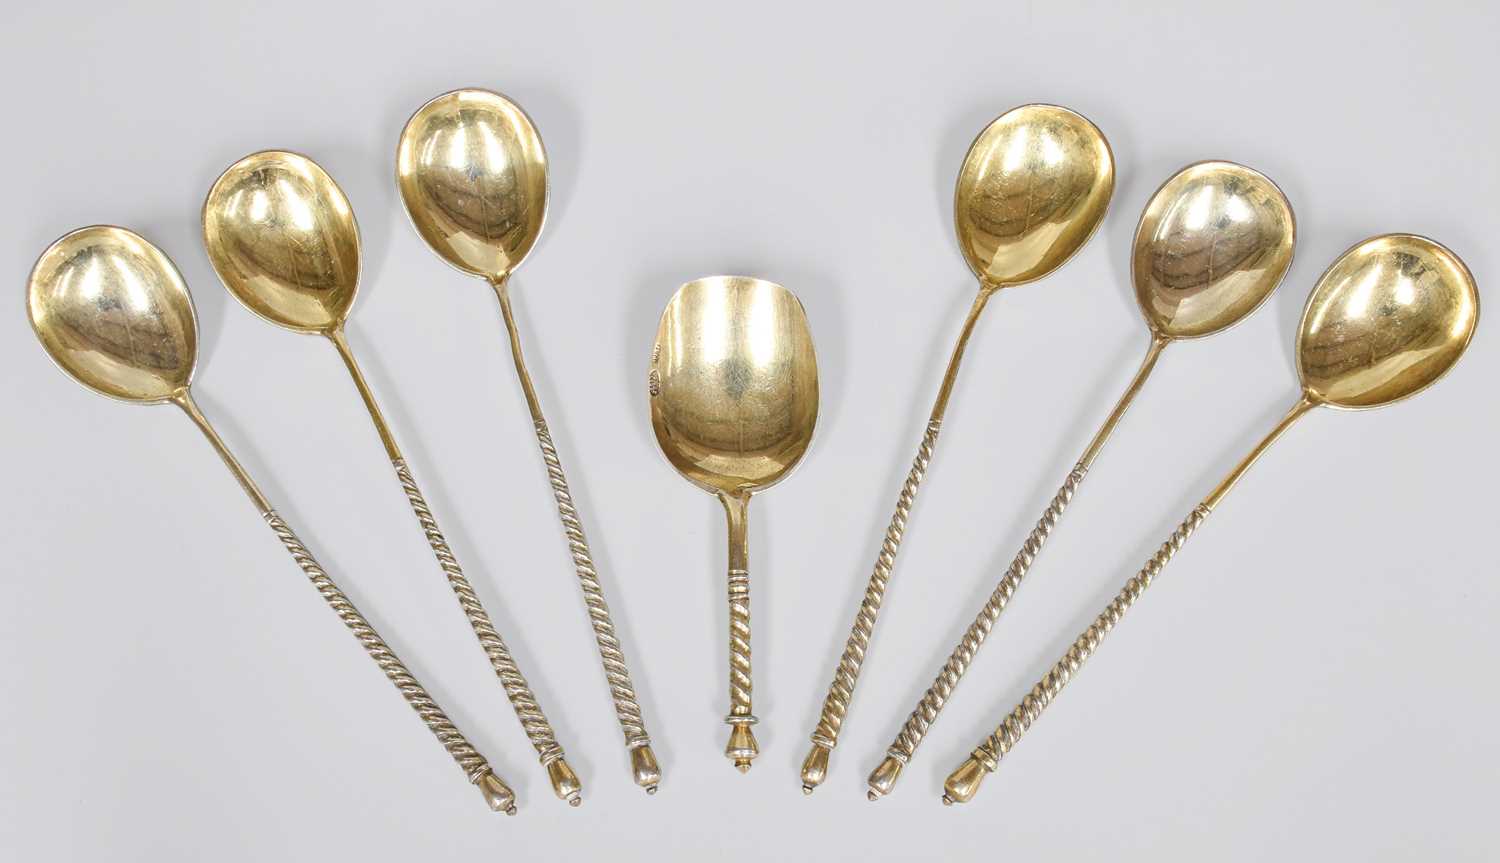 A Set of Six Russian Silver-Gilt Teaspoons, by Stepan Levin, Moscow, Possibly 1882, each with